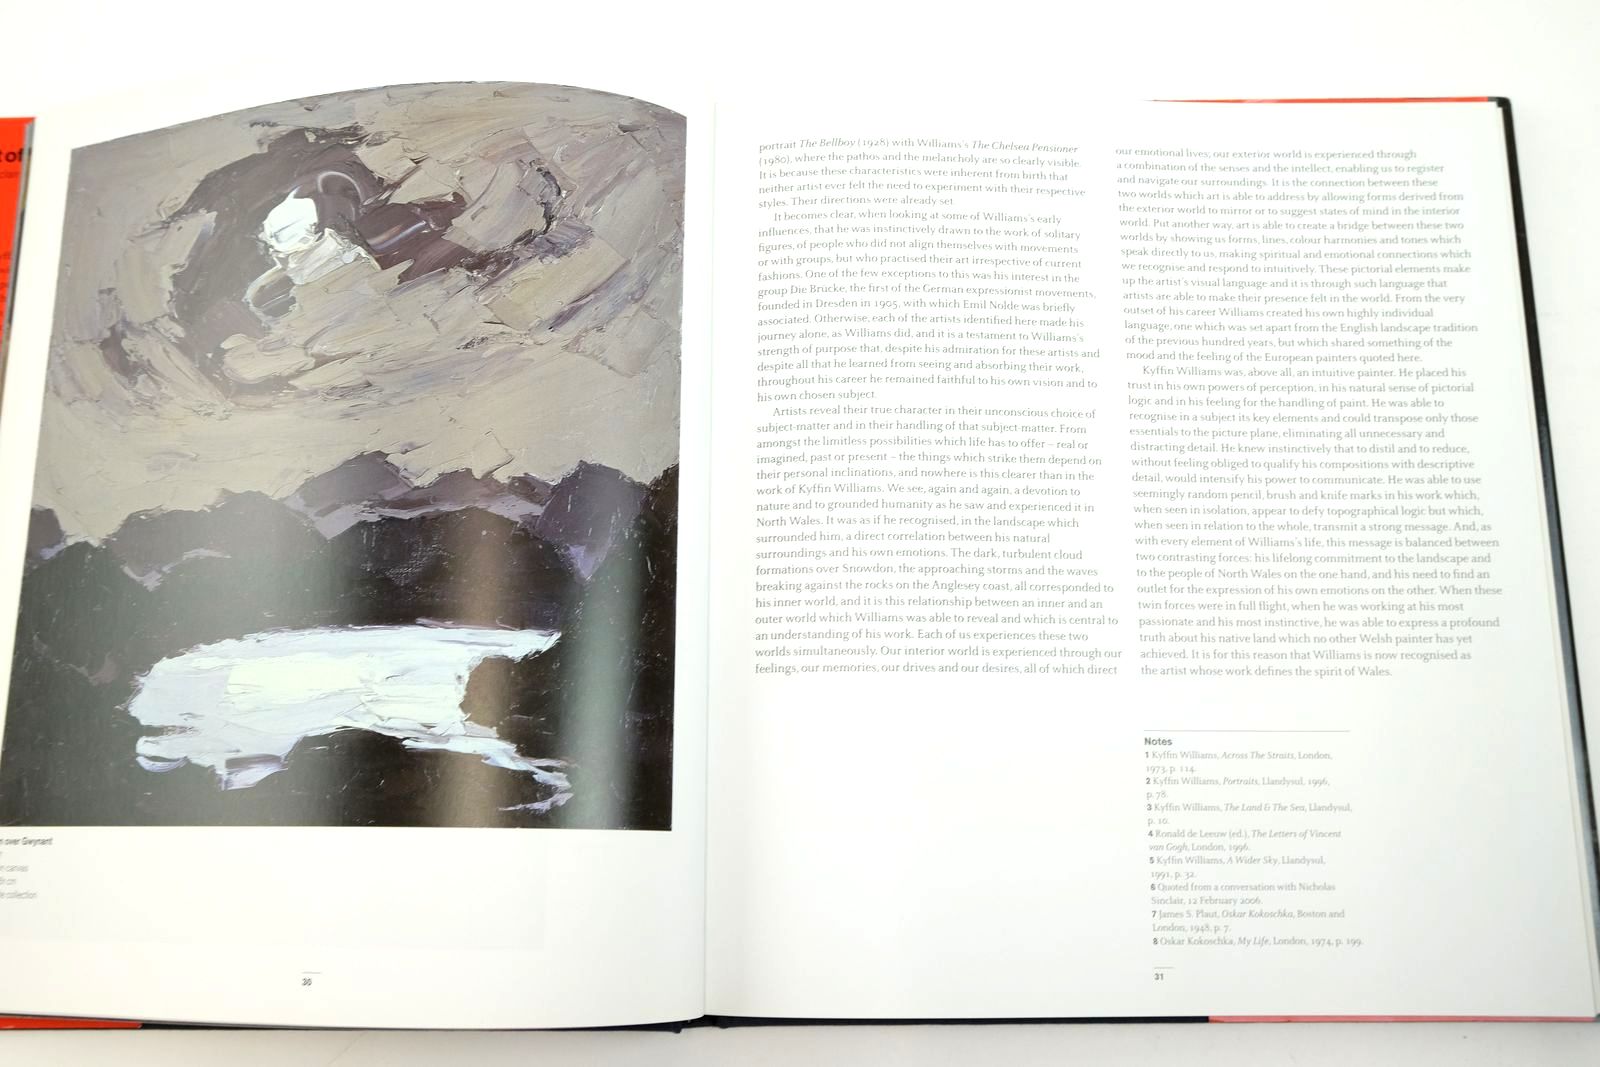 Photo of THE ART OF KYFFIN WILLIAMS written by Sinclair, Nicholas
Evans, Rian illustrated by Williams, Kyffin published by Royal Academy of Arts (STOCK CODE: 2140681)  for sale by Stella & Rose's Books